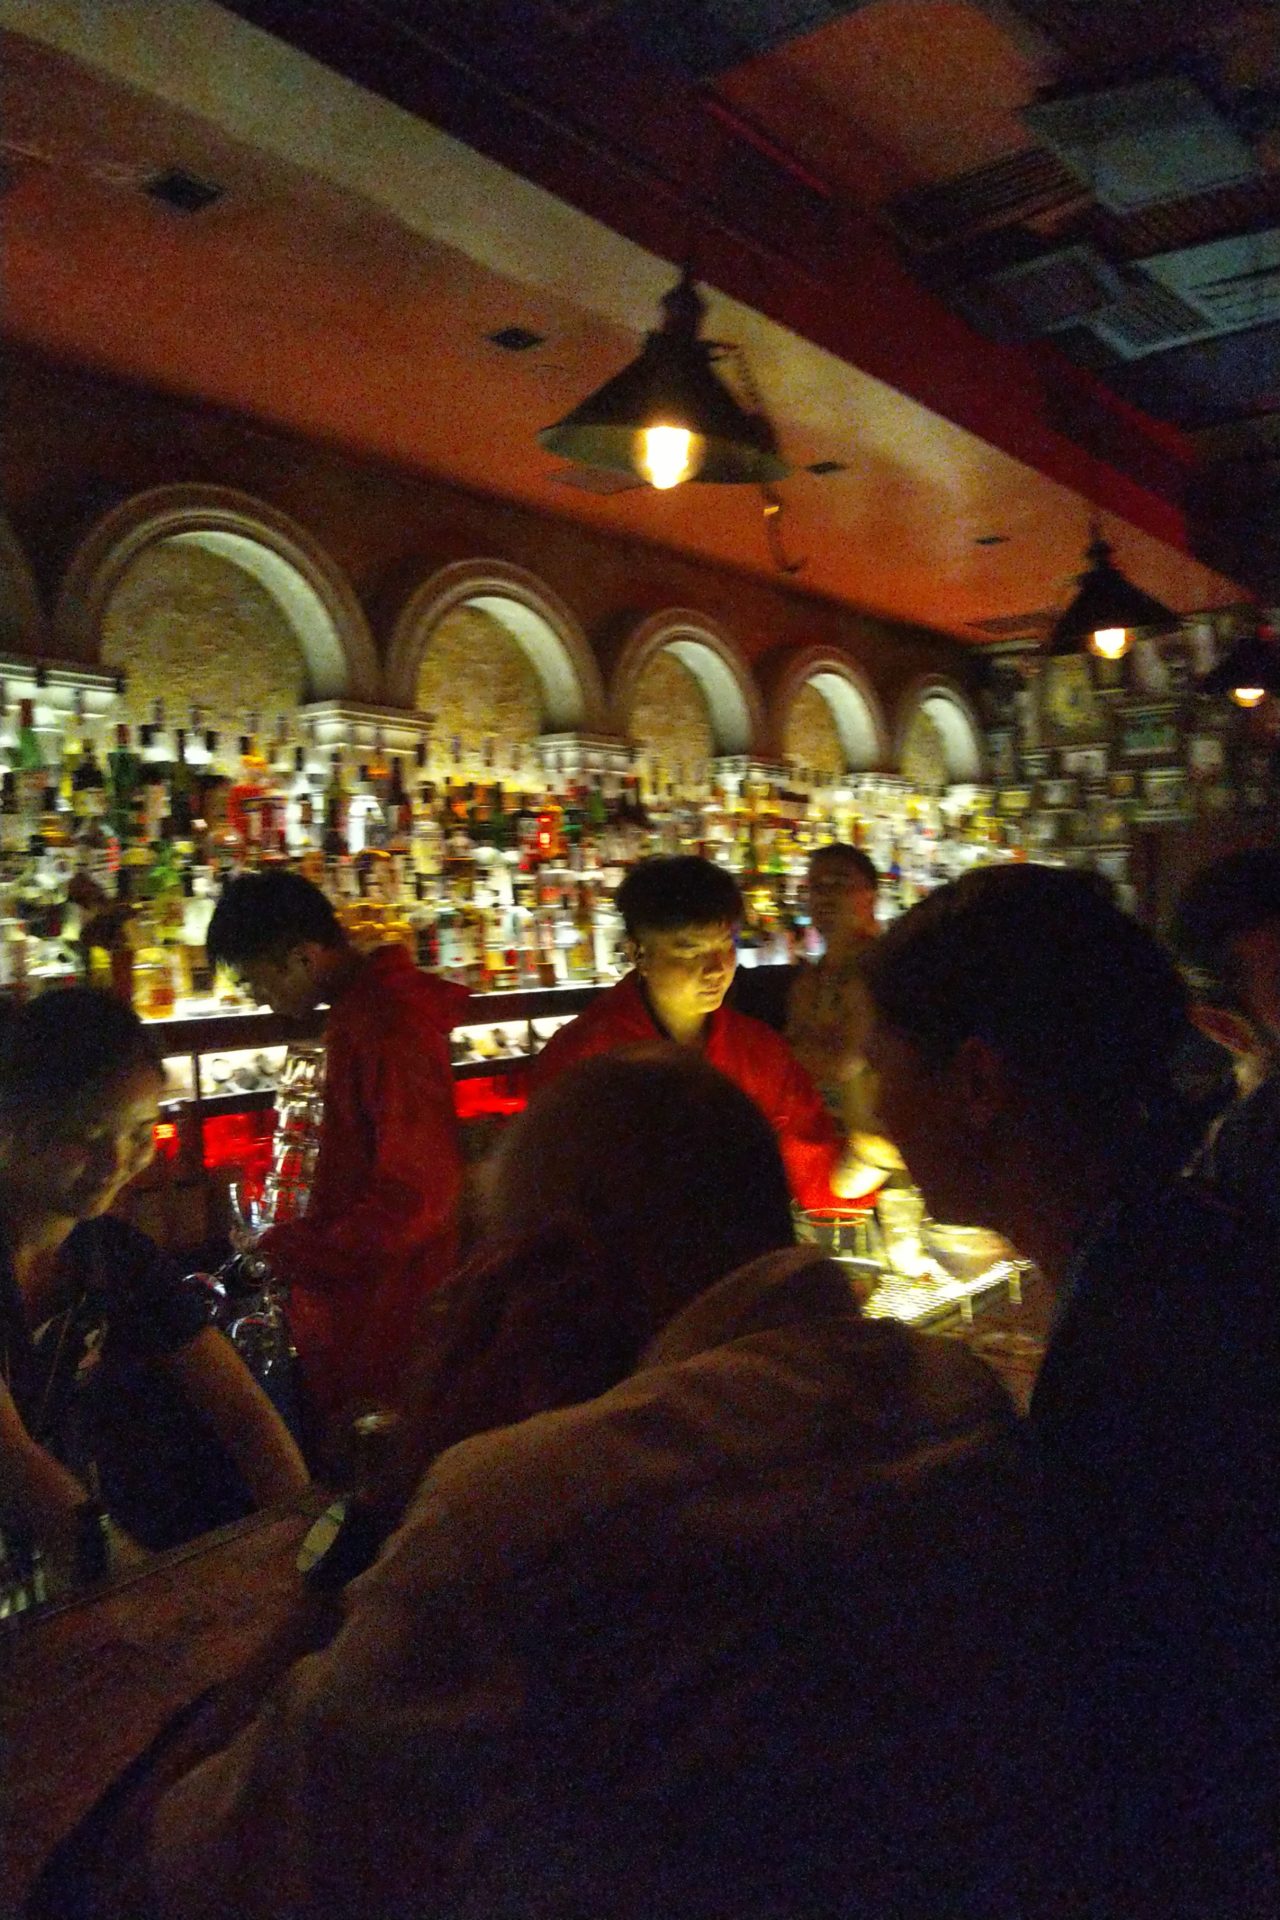 a group of people at a bar